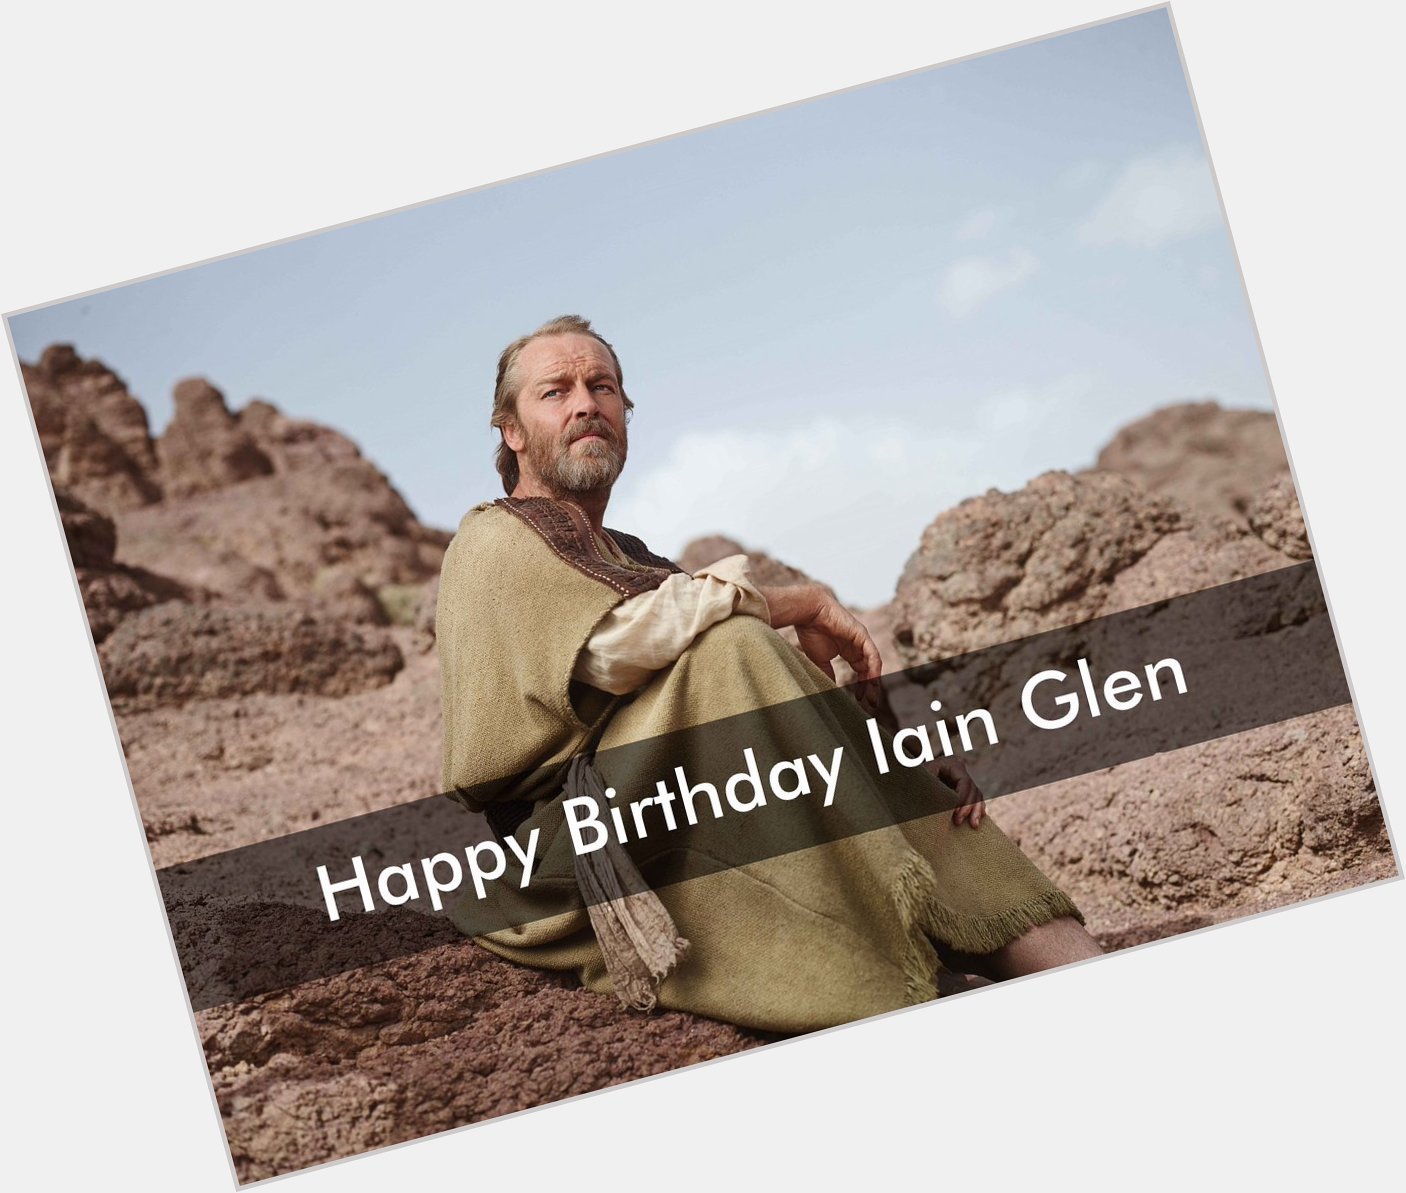 We\re wishing a very happy birthday to Iain Glen our one and only Jacob in 